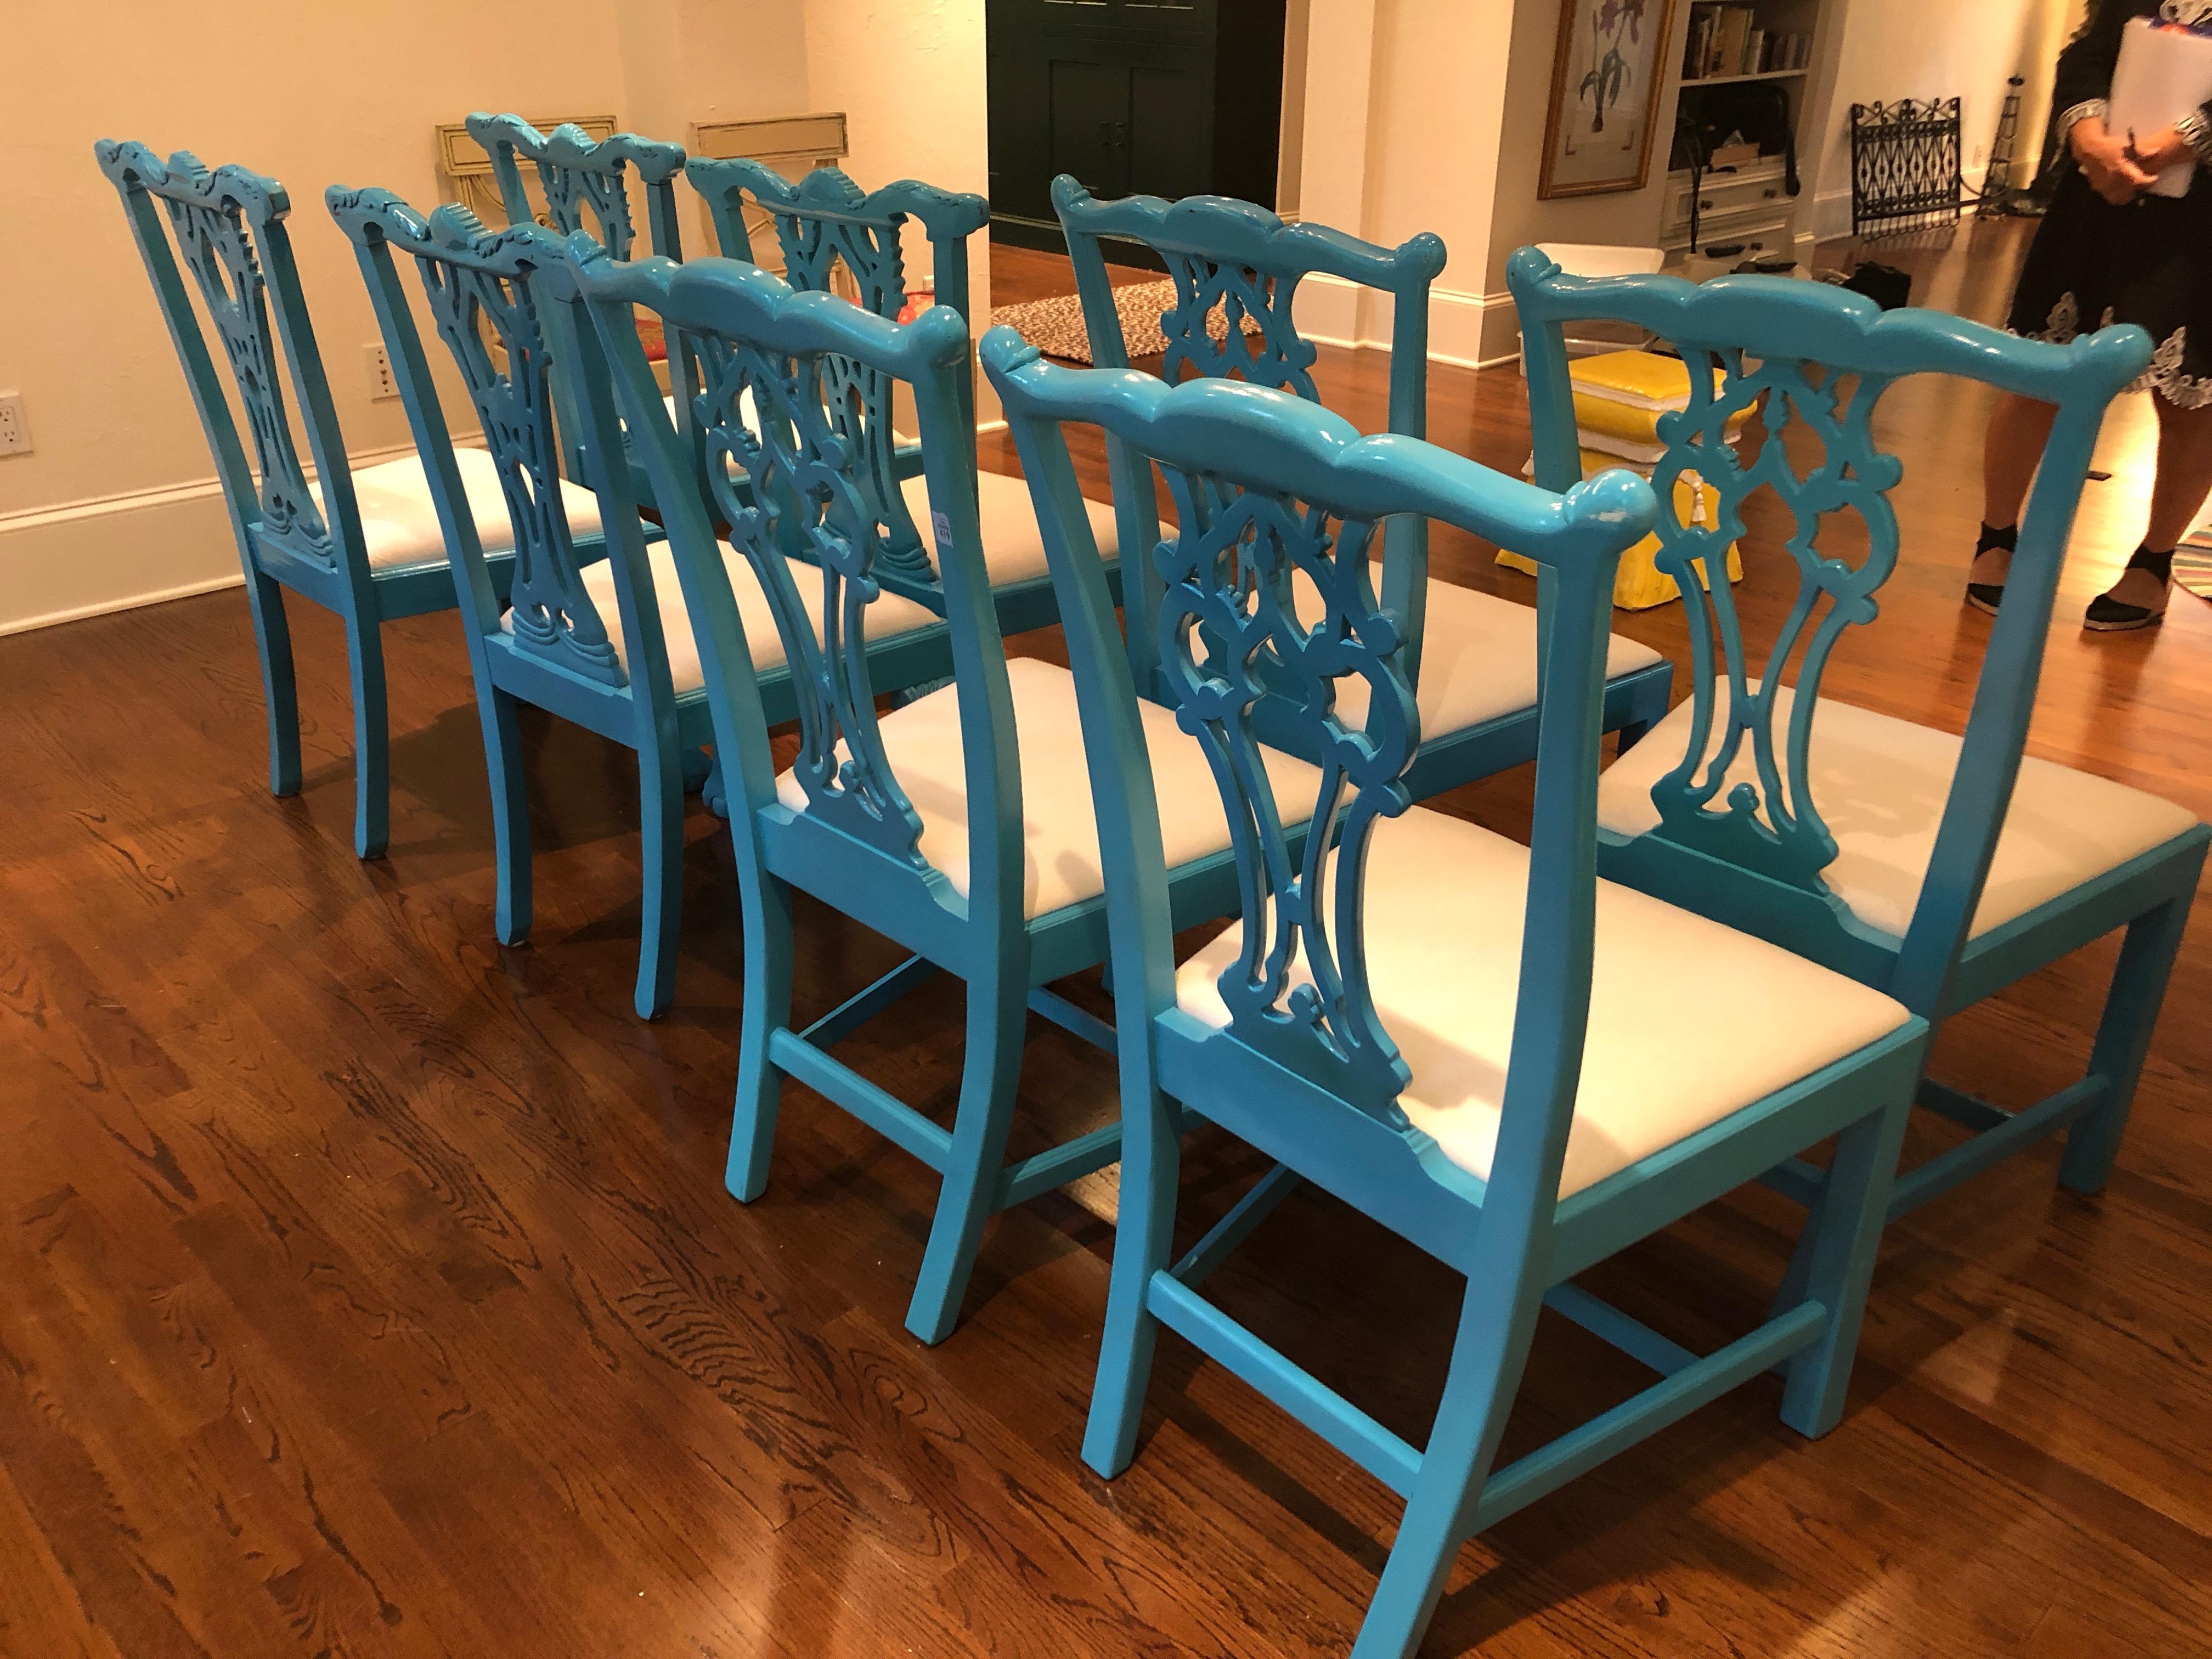 A set of 8 super stylish elaborately carved wood dining side chairs, having glossy turquoise lacquer and upholstered seats. Upon close inspection, it's actually two sets of 4, adding to the visual play and interest.
Measures: Seat height 19, seat